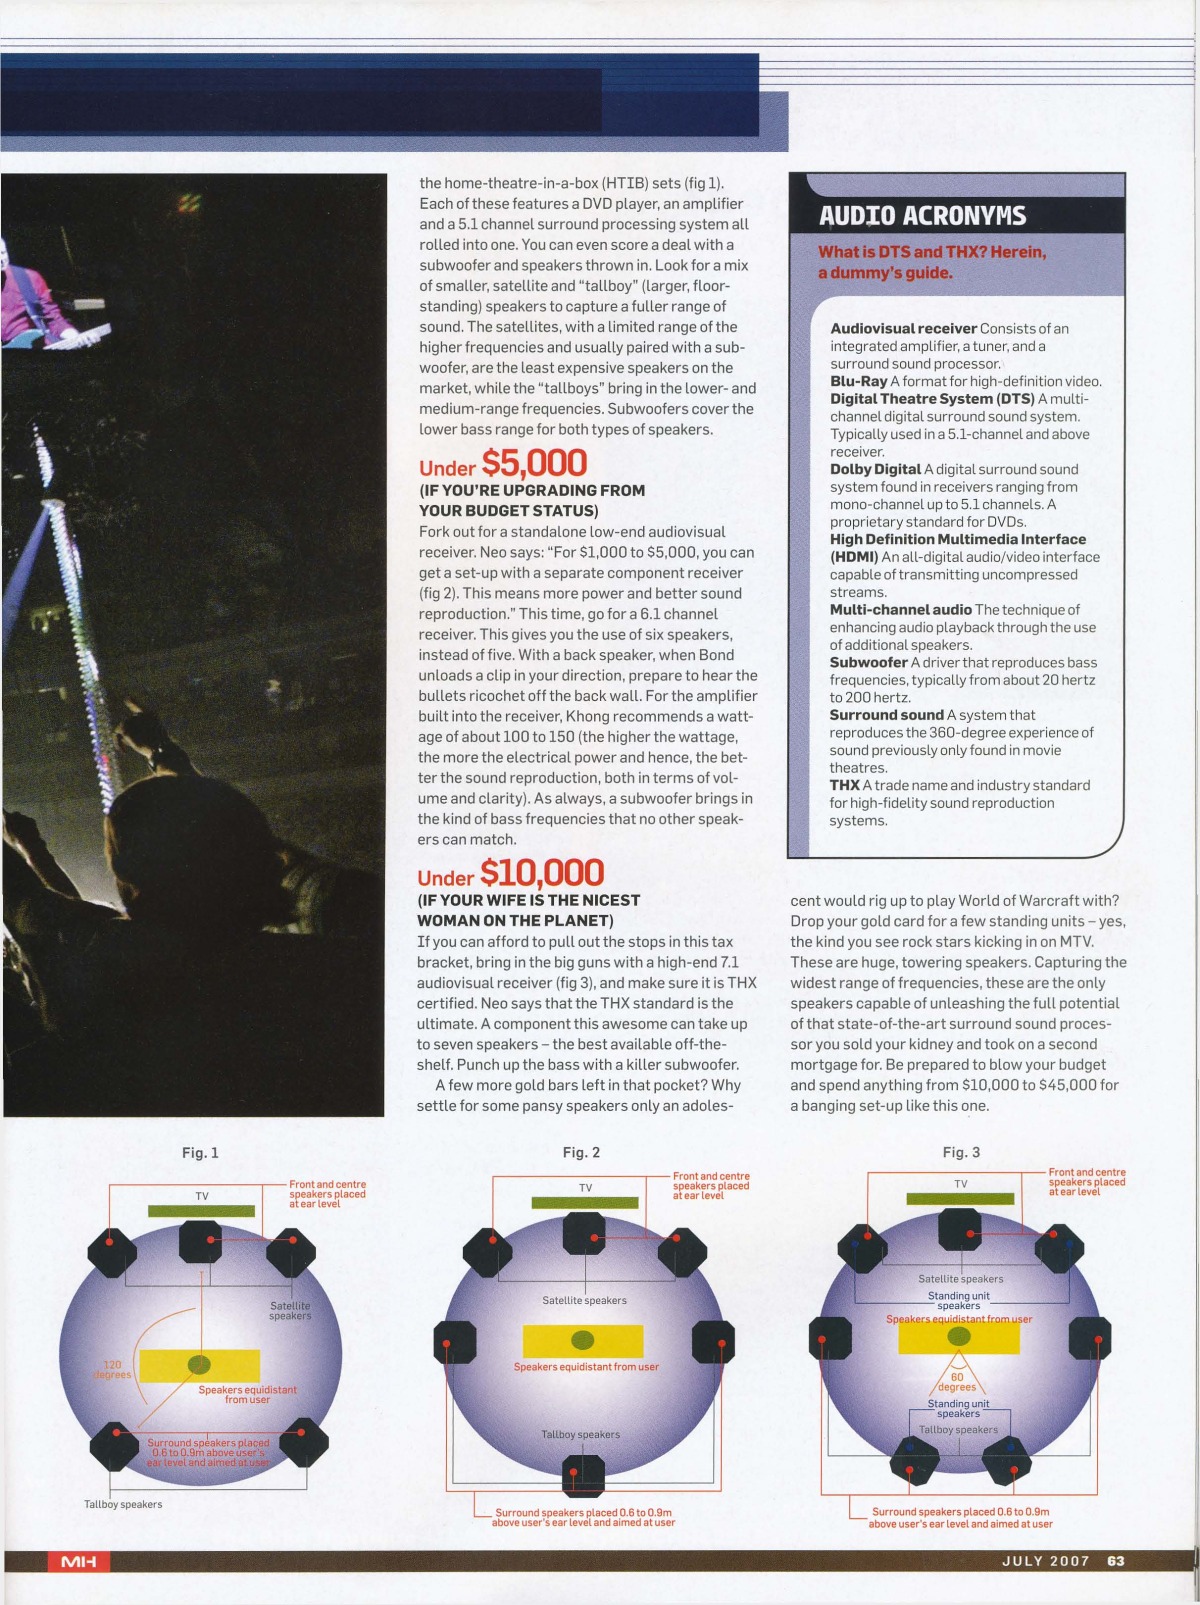 men's health singapore - 2007 jul - know-it-all (thud thumping)_page_2.jpg